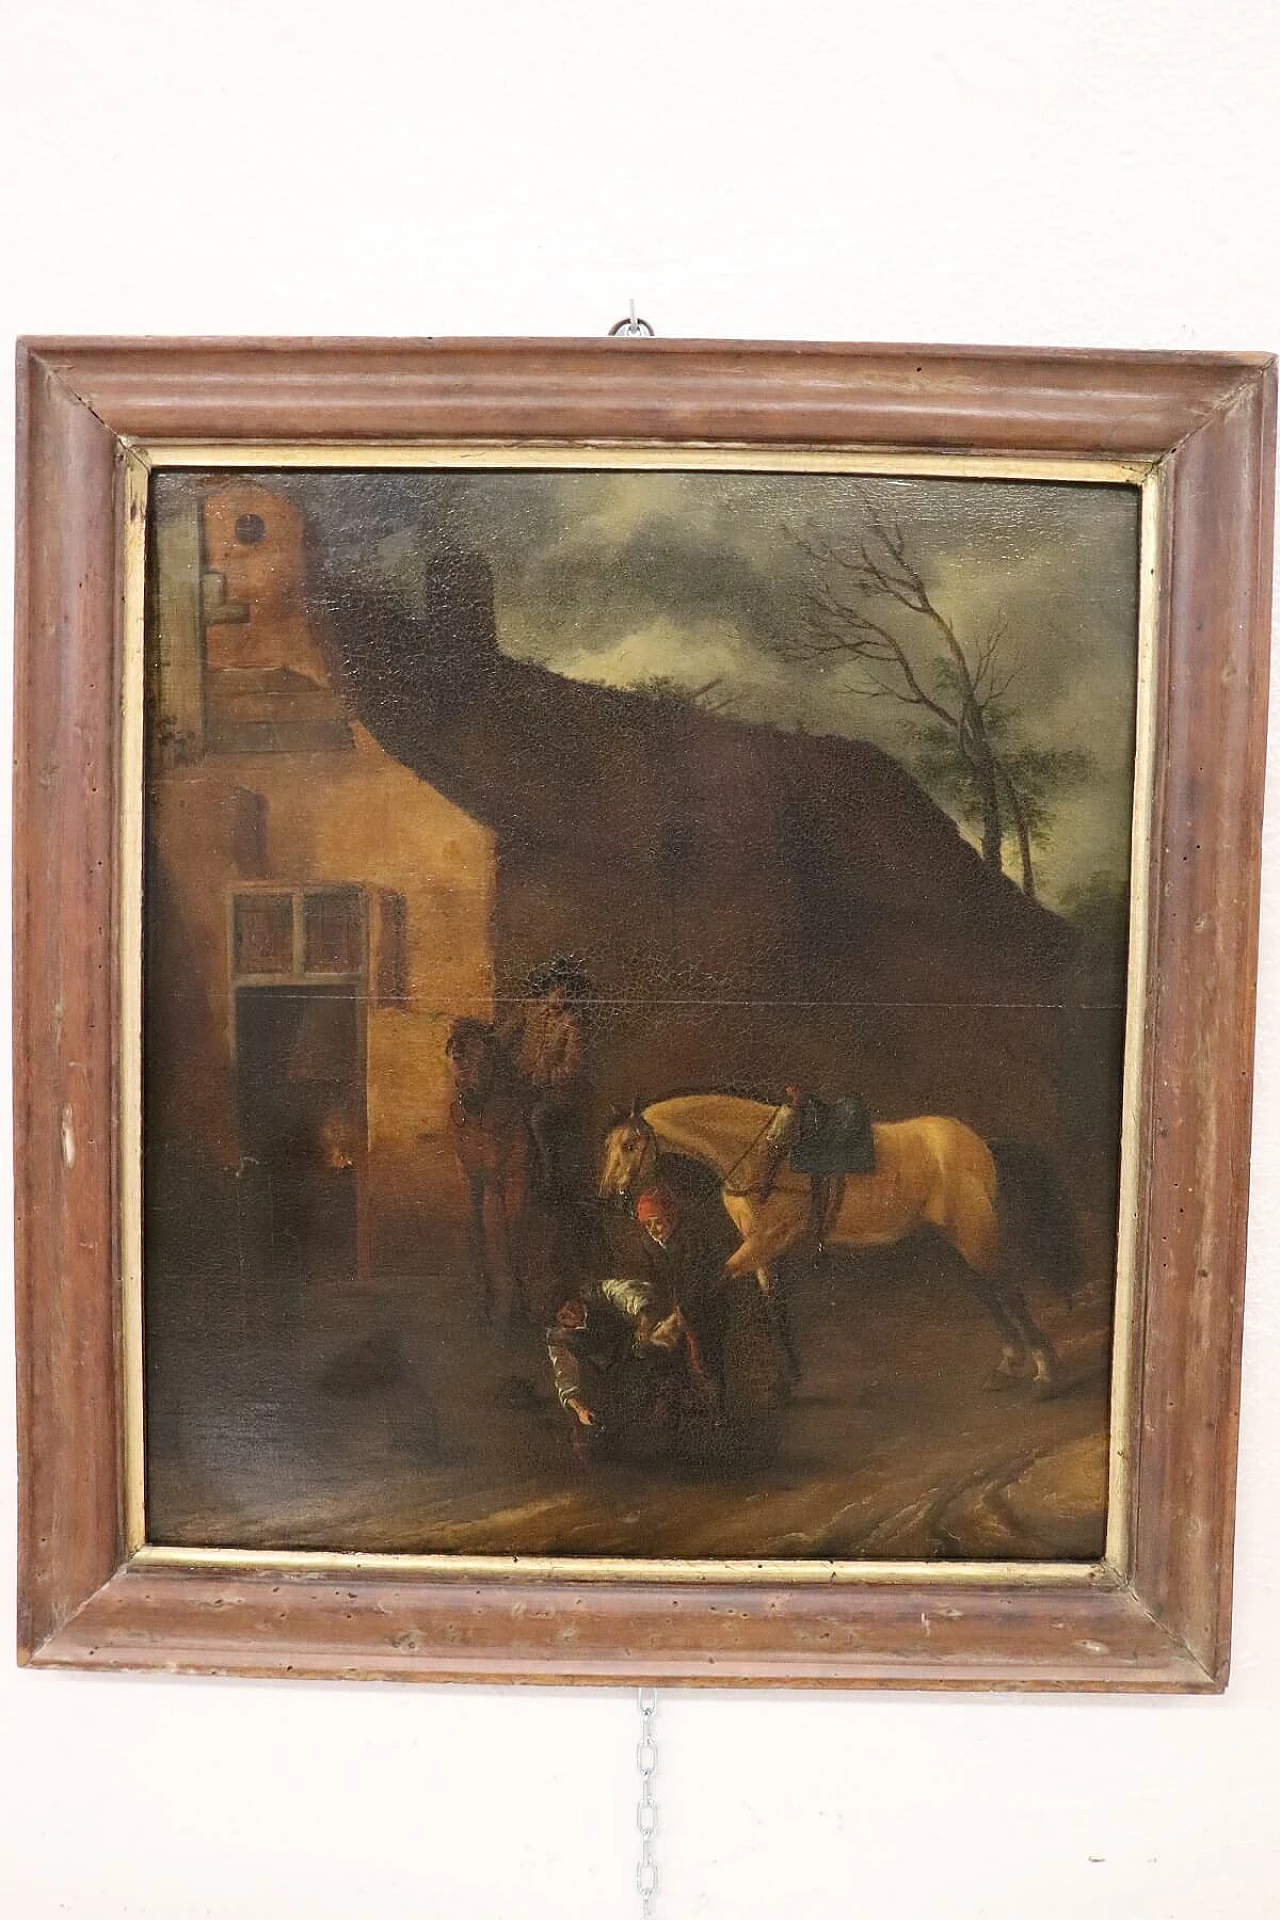 Farrier at work, oil painting on canvas, first half of the 17th century 5